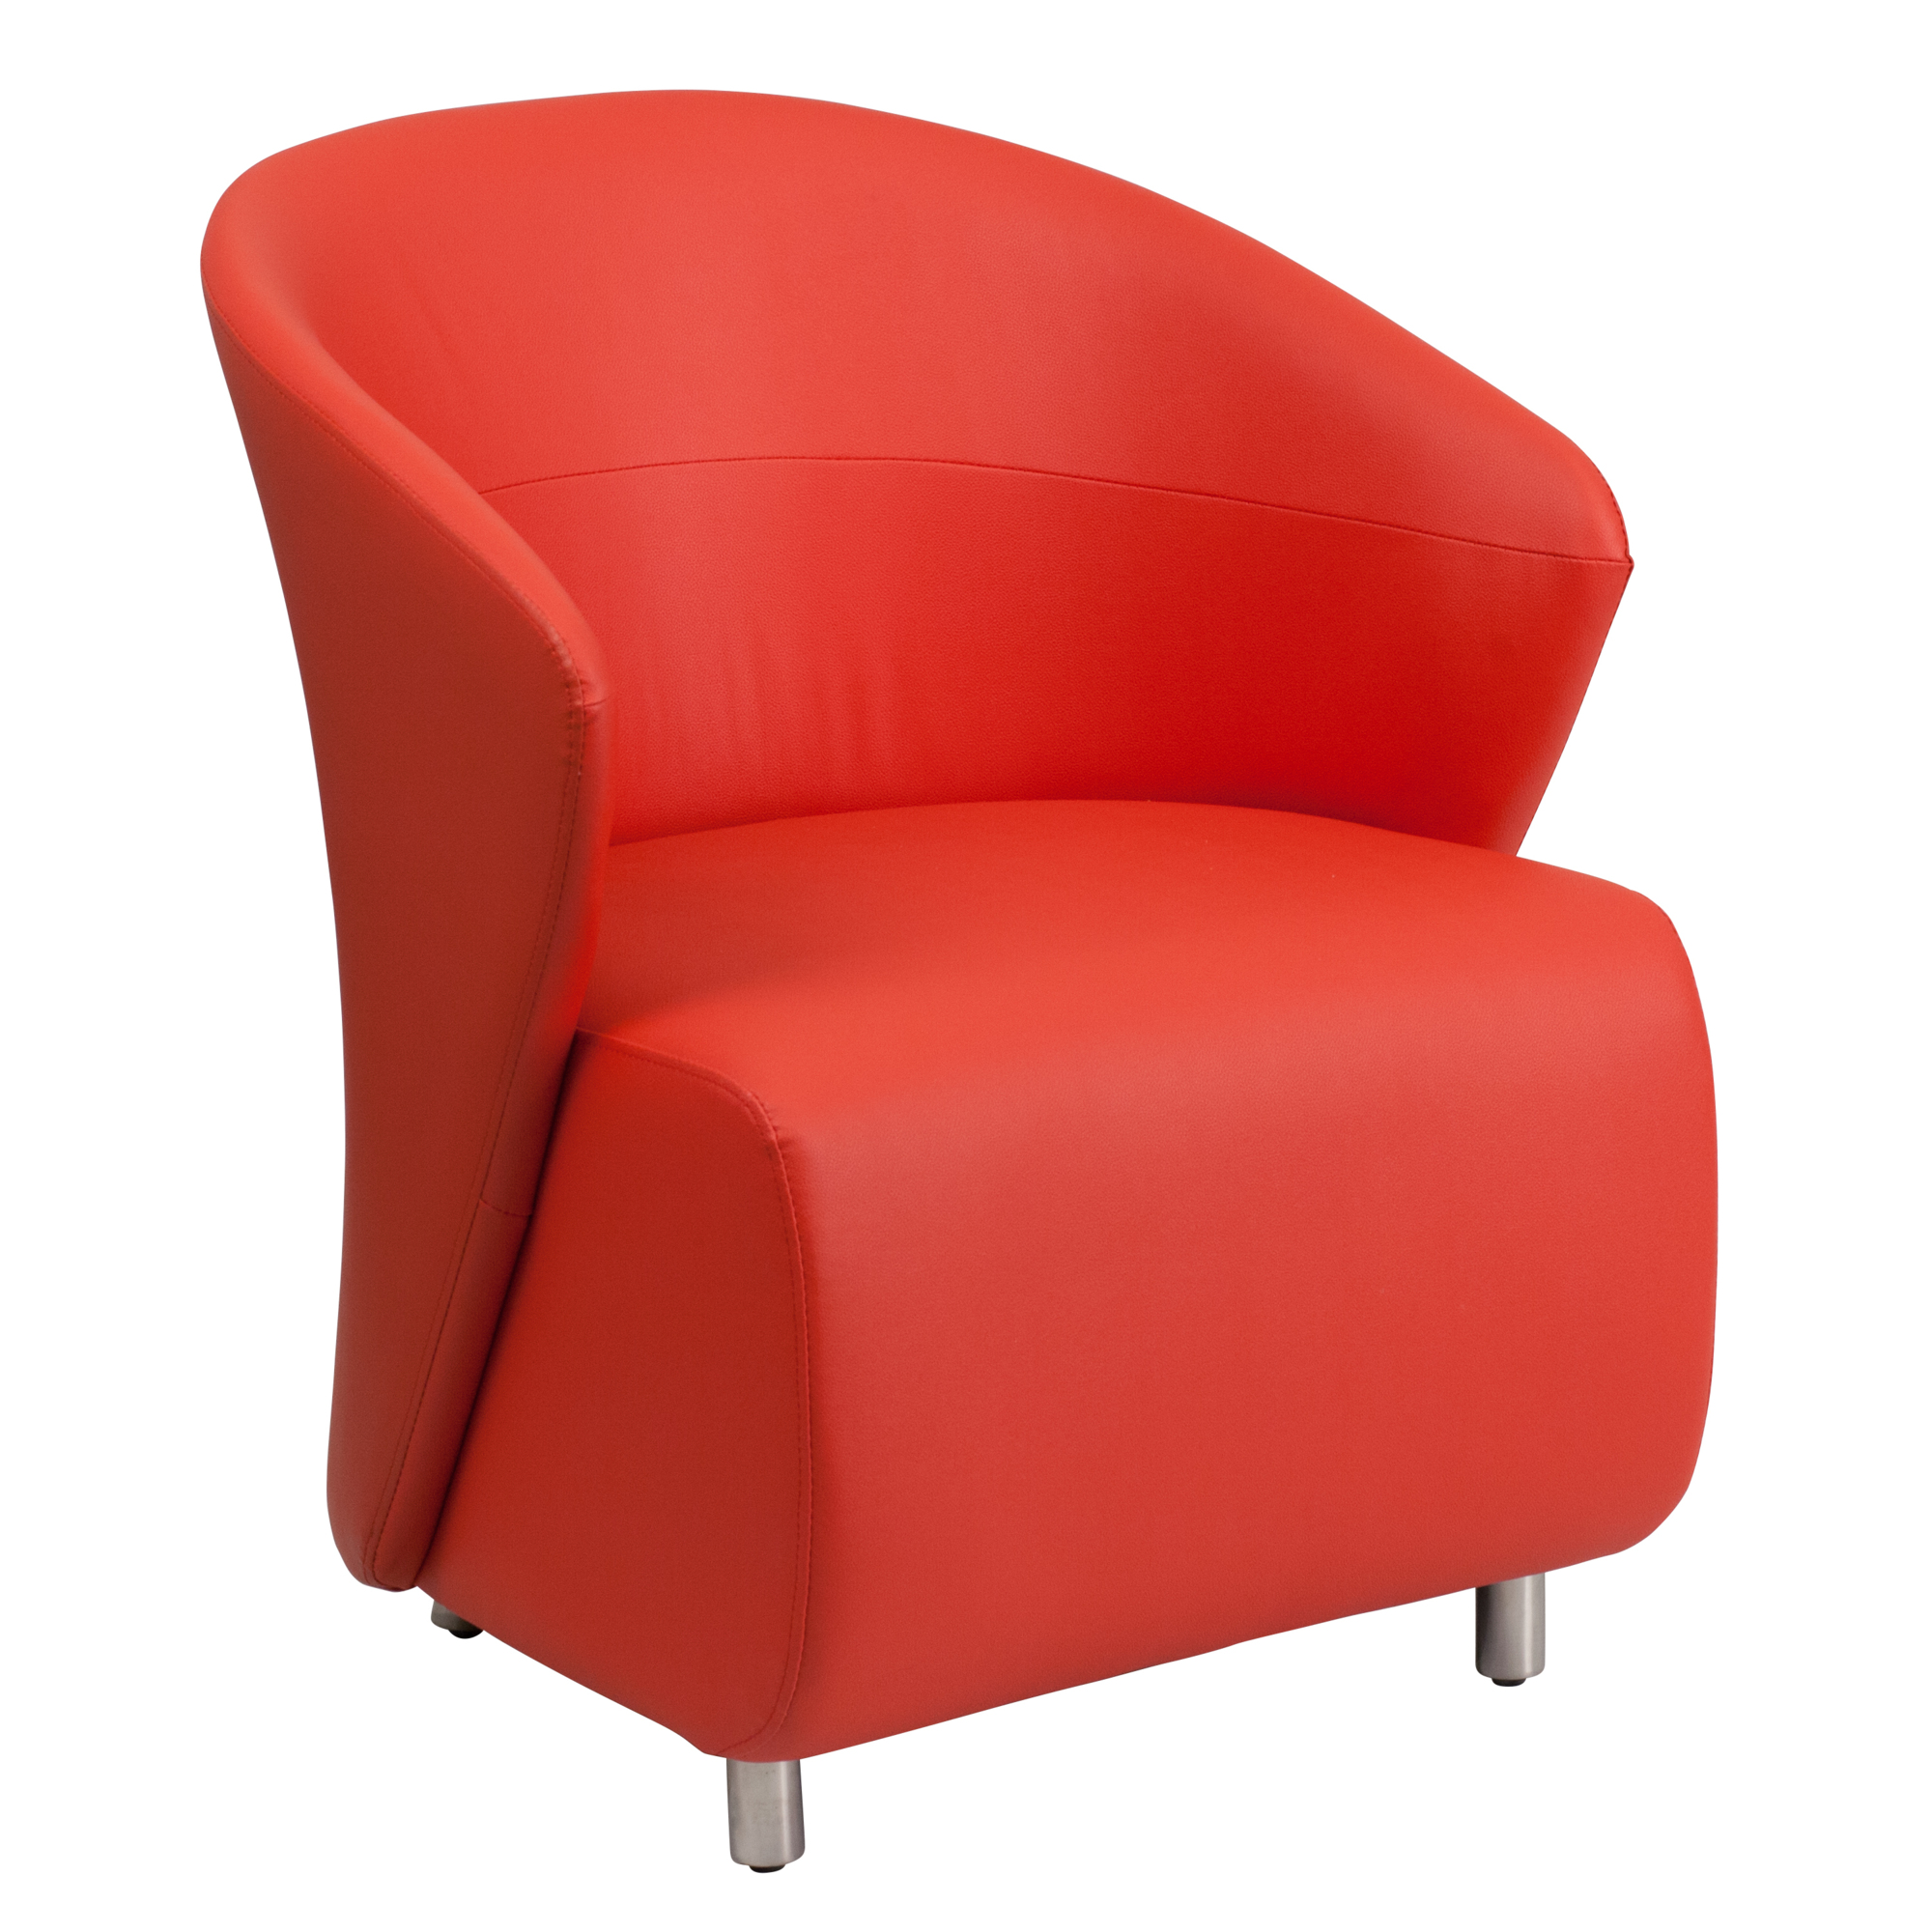 Flash Furniture, Red LeatherSoft Curved Barrel Back Lounge Chair, Primary Color Red, Included (qty.) 1, Model ZB6RD